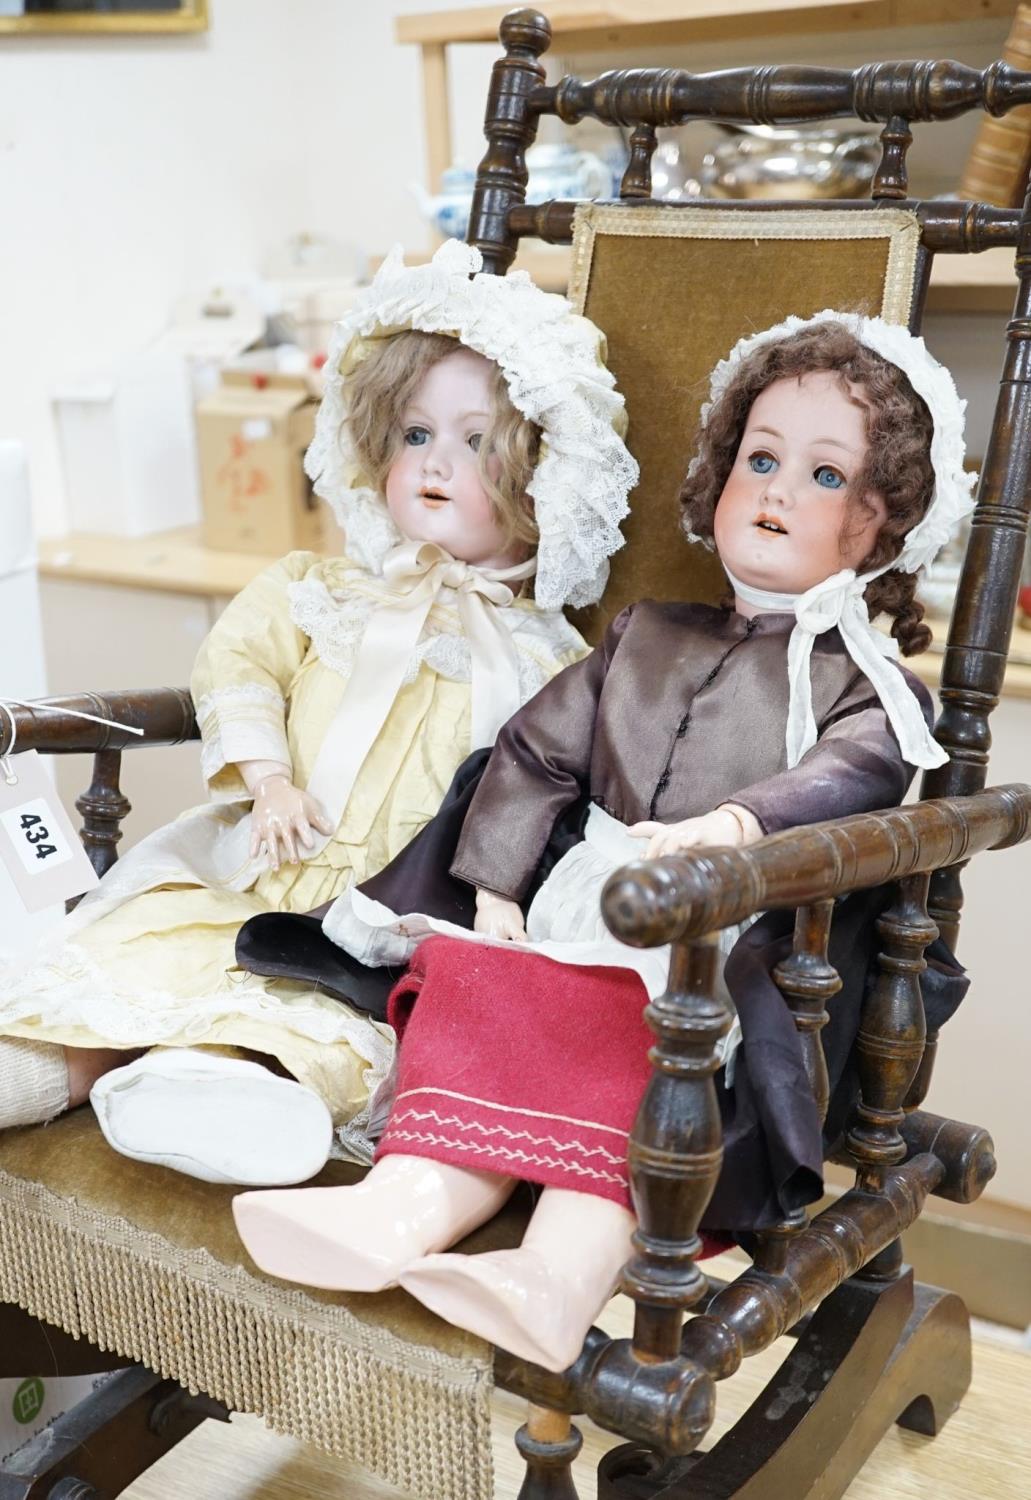 A Heubach, Koppelsdorf 250 bisque doll and an Armand Marseille 390 bisque doll, seated in turned